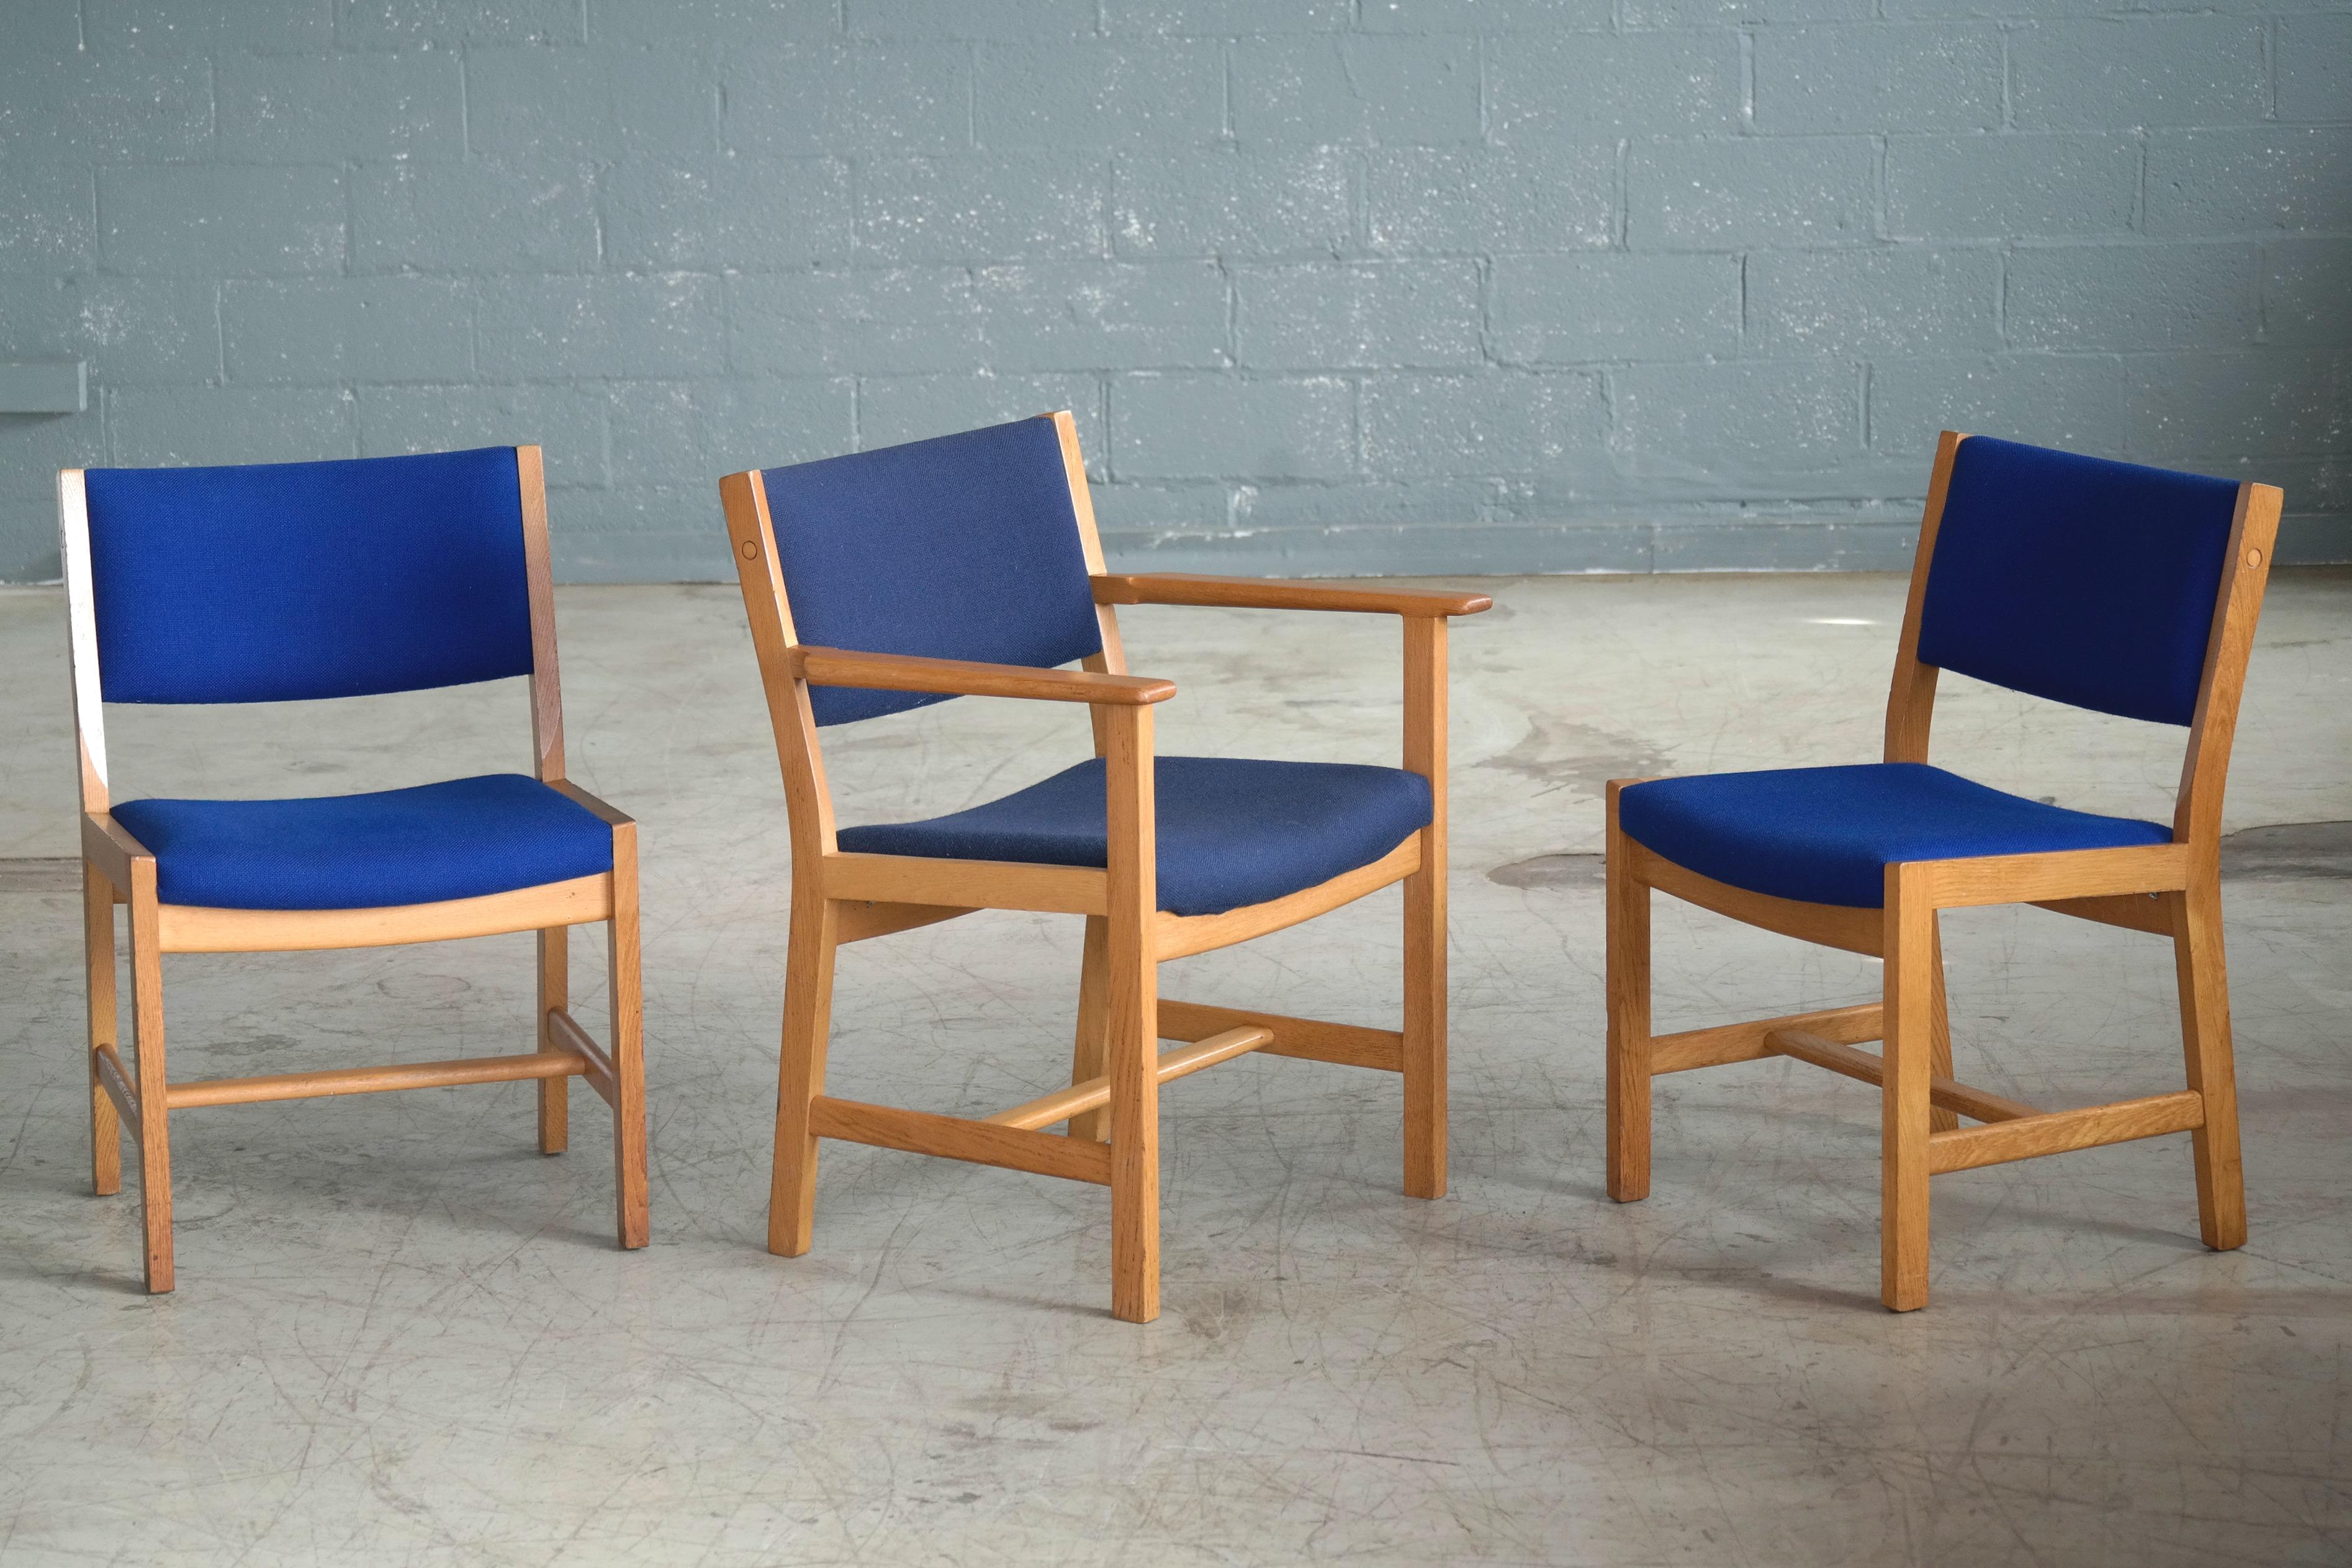 We love the angular modern clean lines of this set of Hans Wegner designed dining chairs produced by GETAMA of Denmark in the early 1970s. Manufactured from solid white oak and covered in blue wool fabric by Kvadrat. The set has seven side chairs